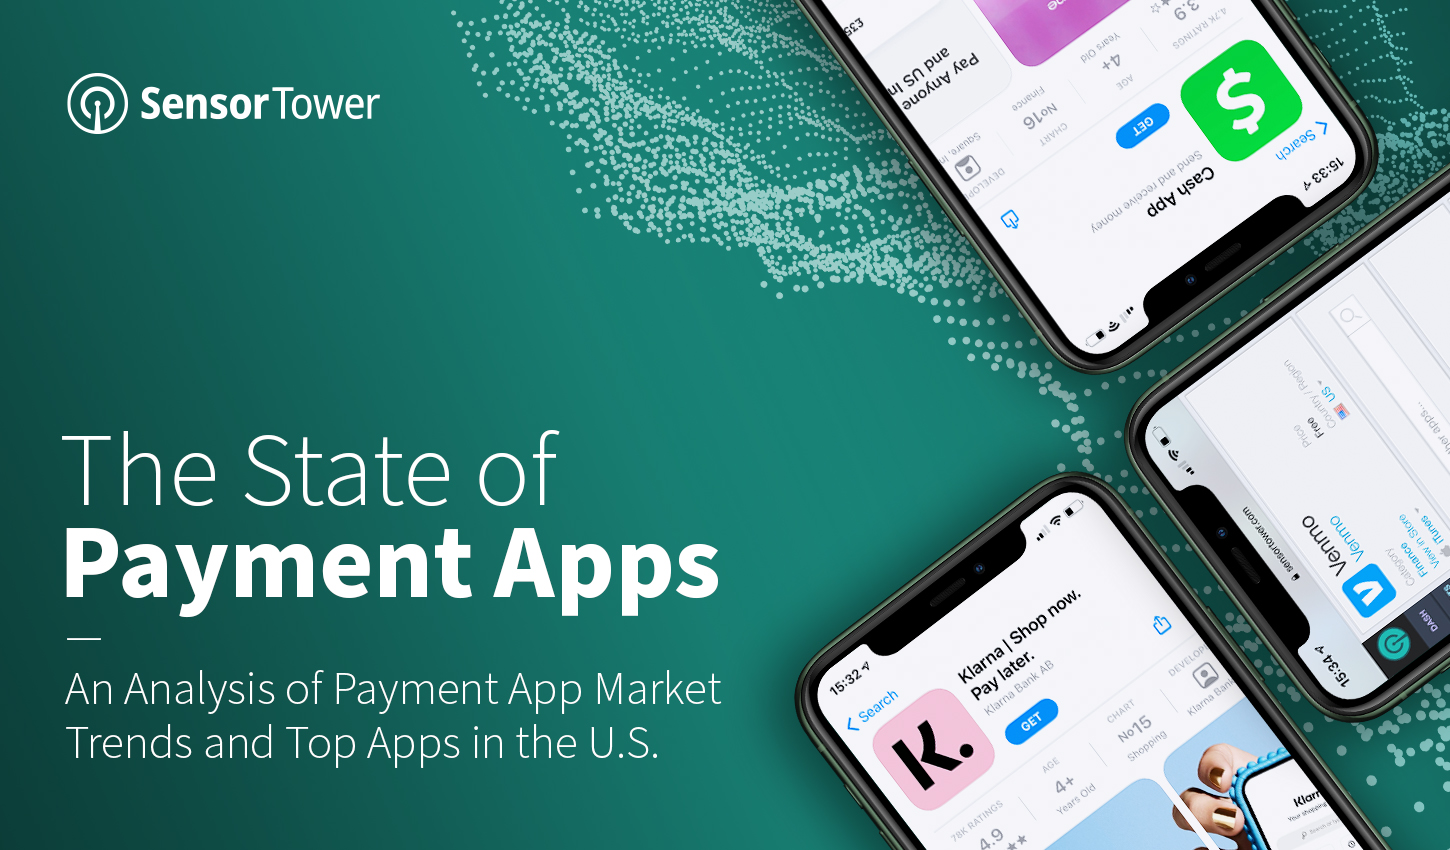 Three takeaways from Sensor Tower's 2021 State of Payment Apps report.